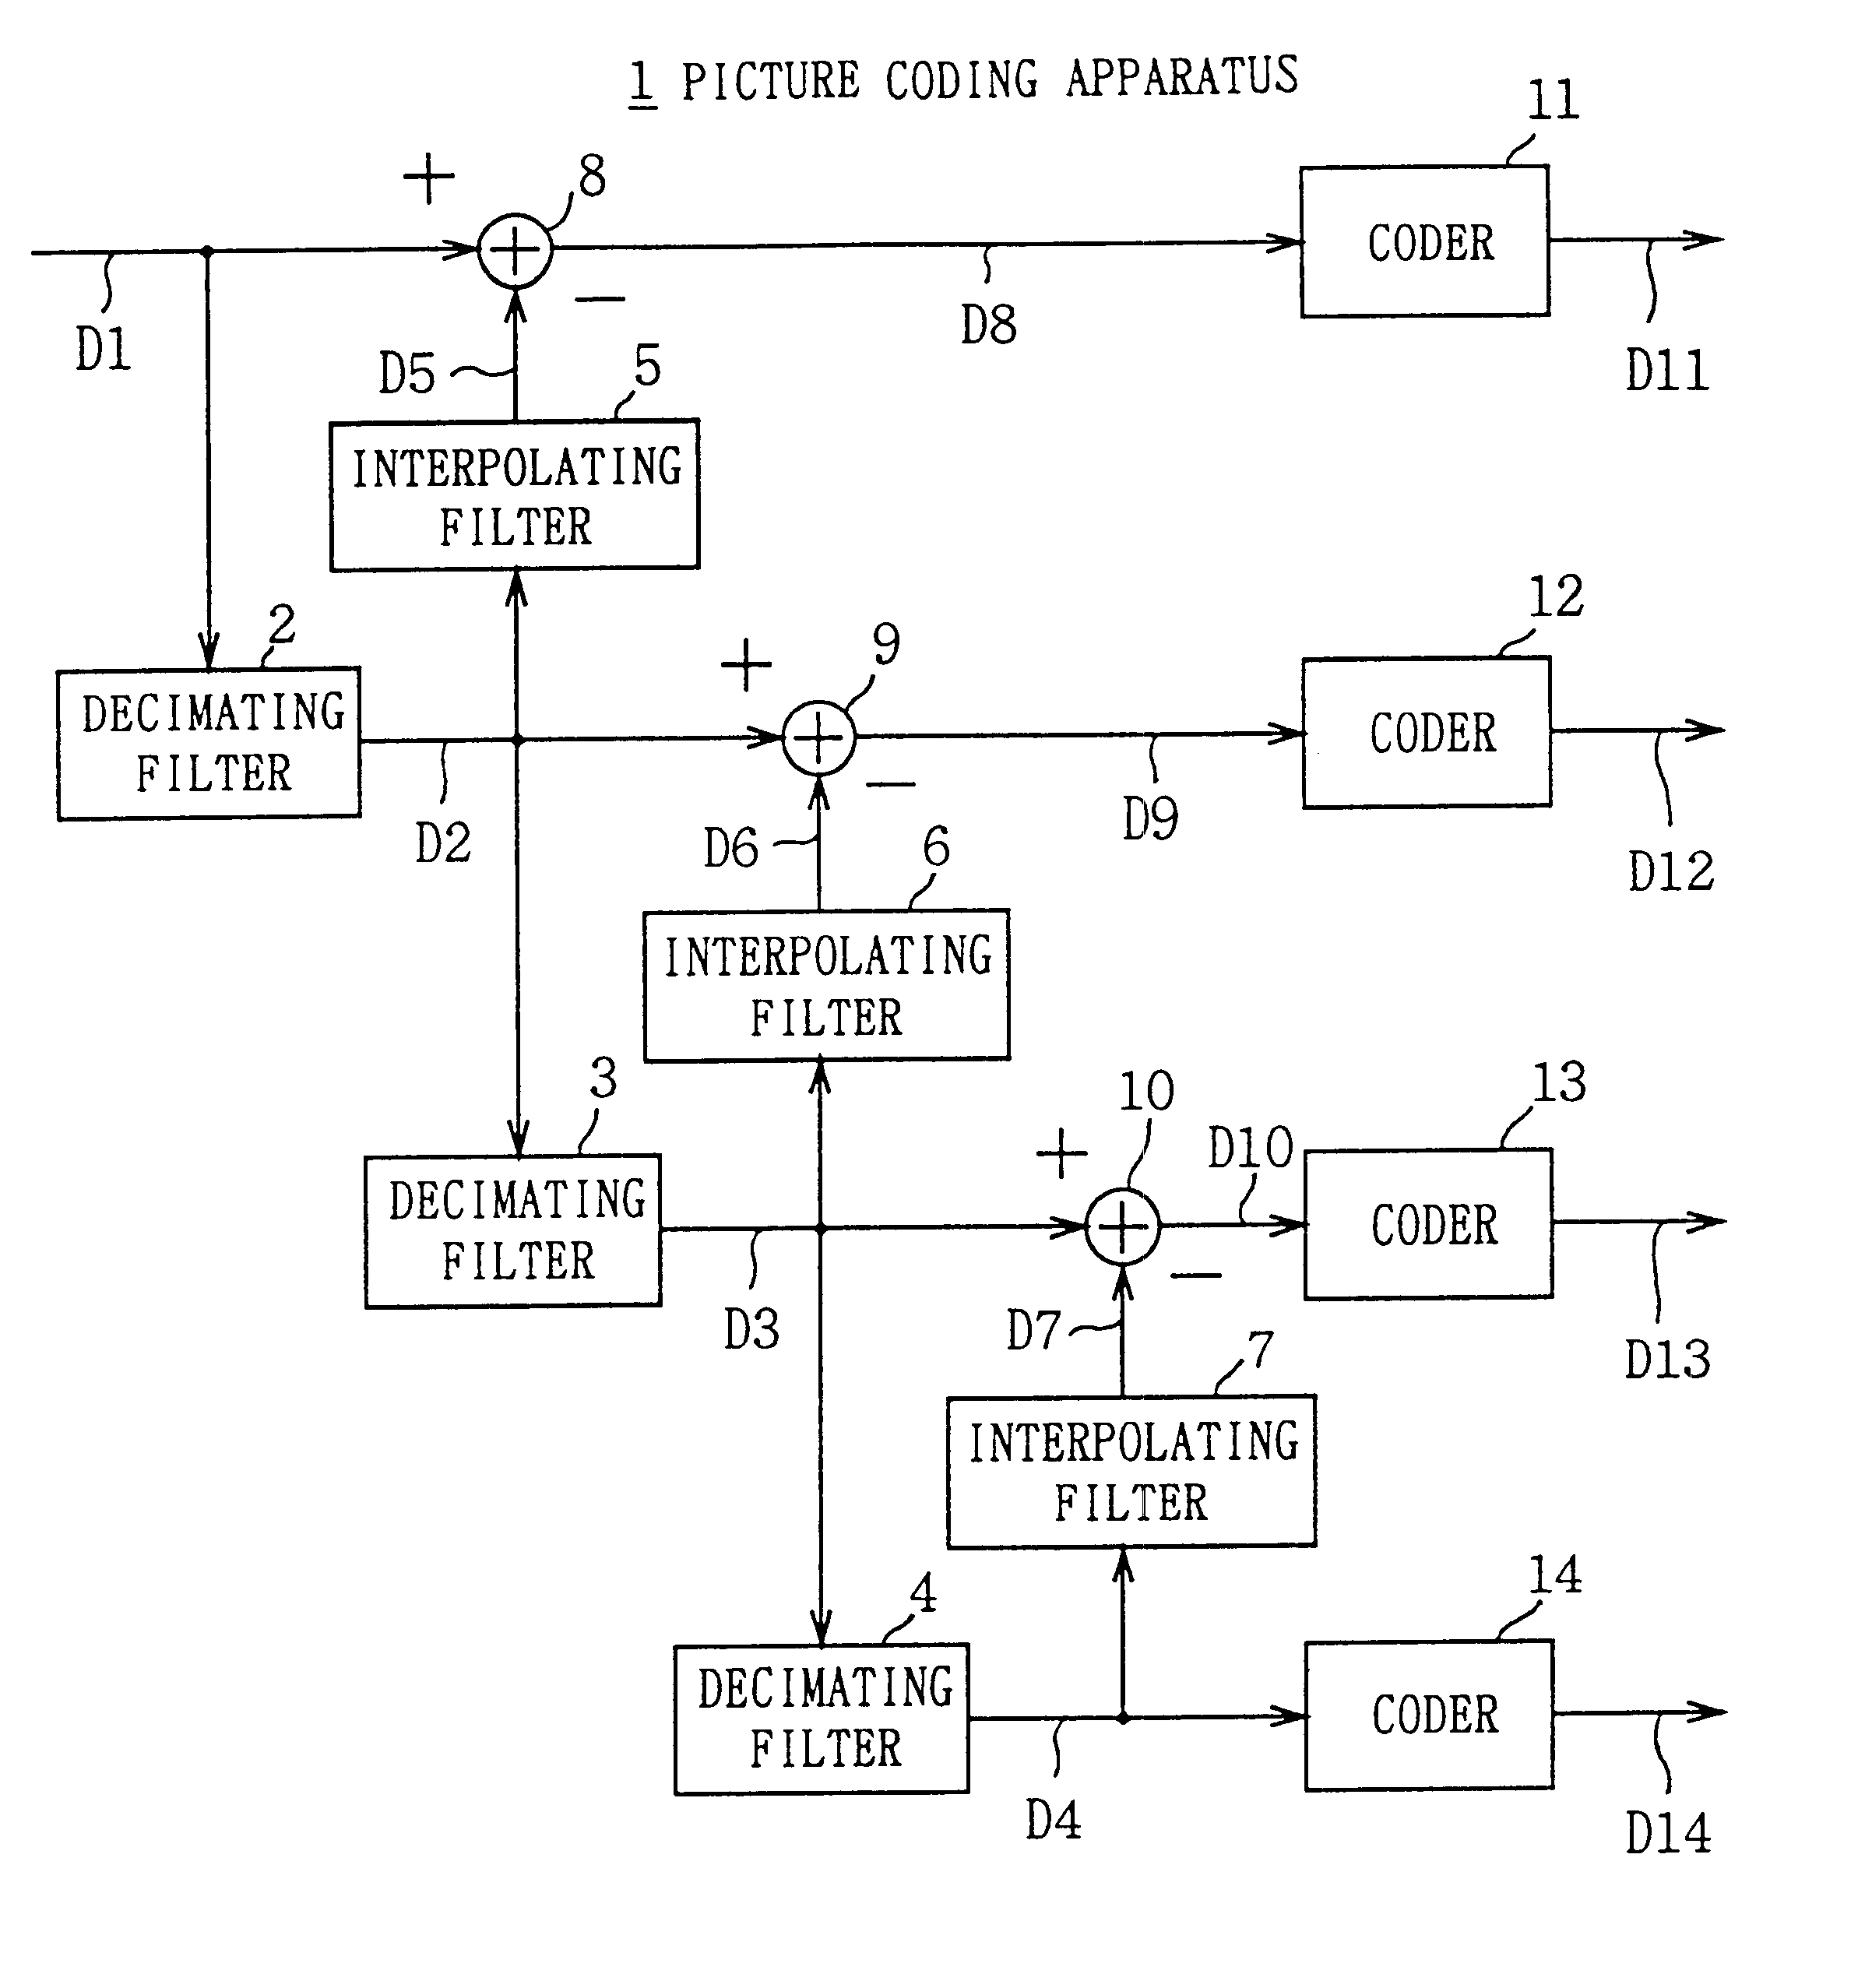 Picture coding apparatus and method thereof